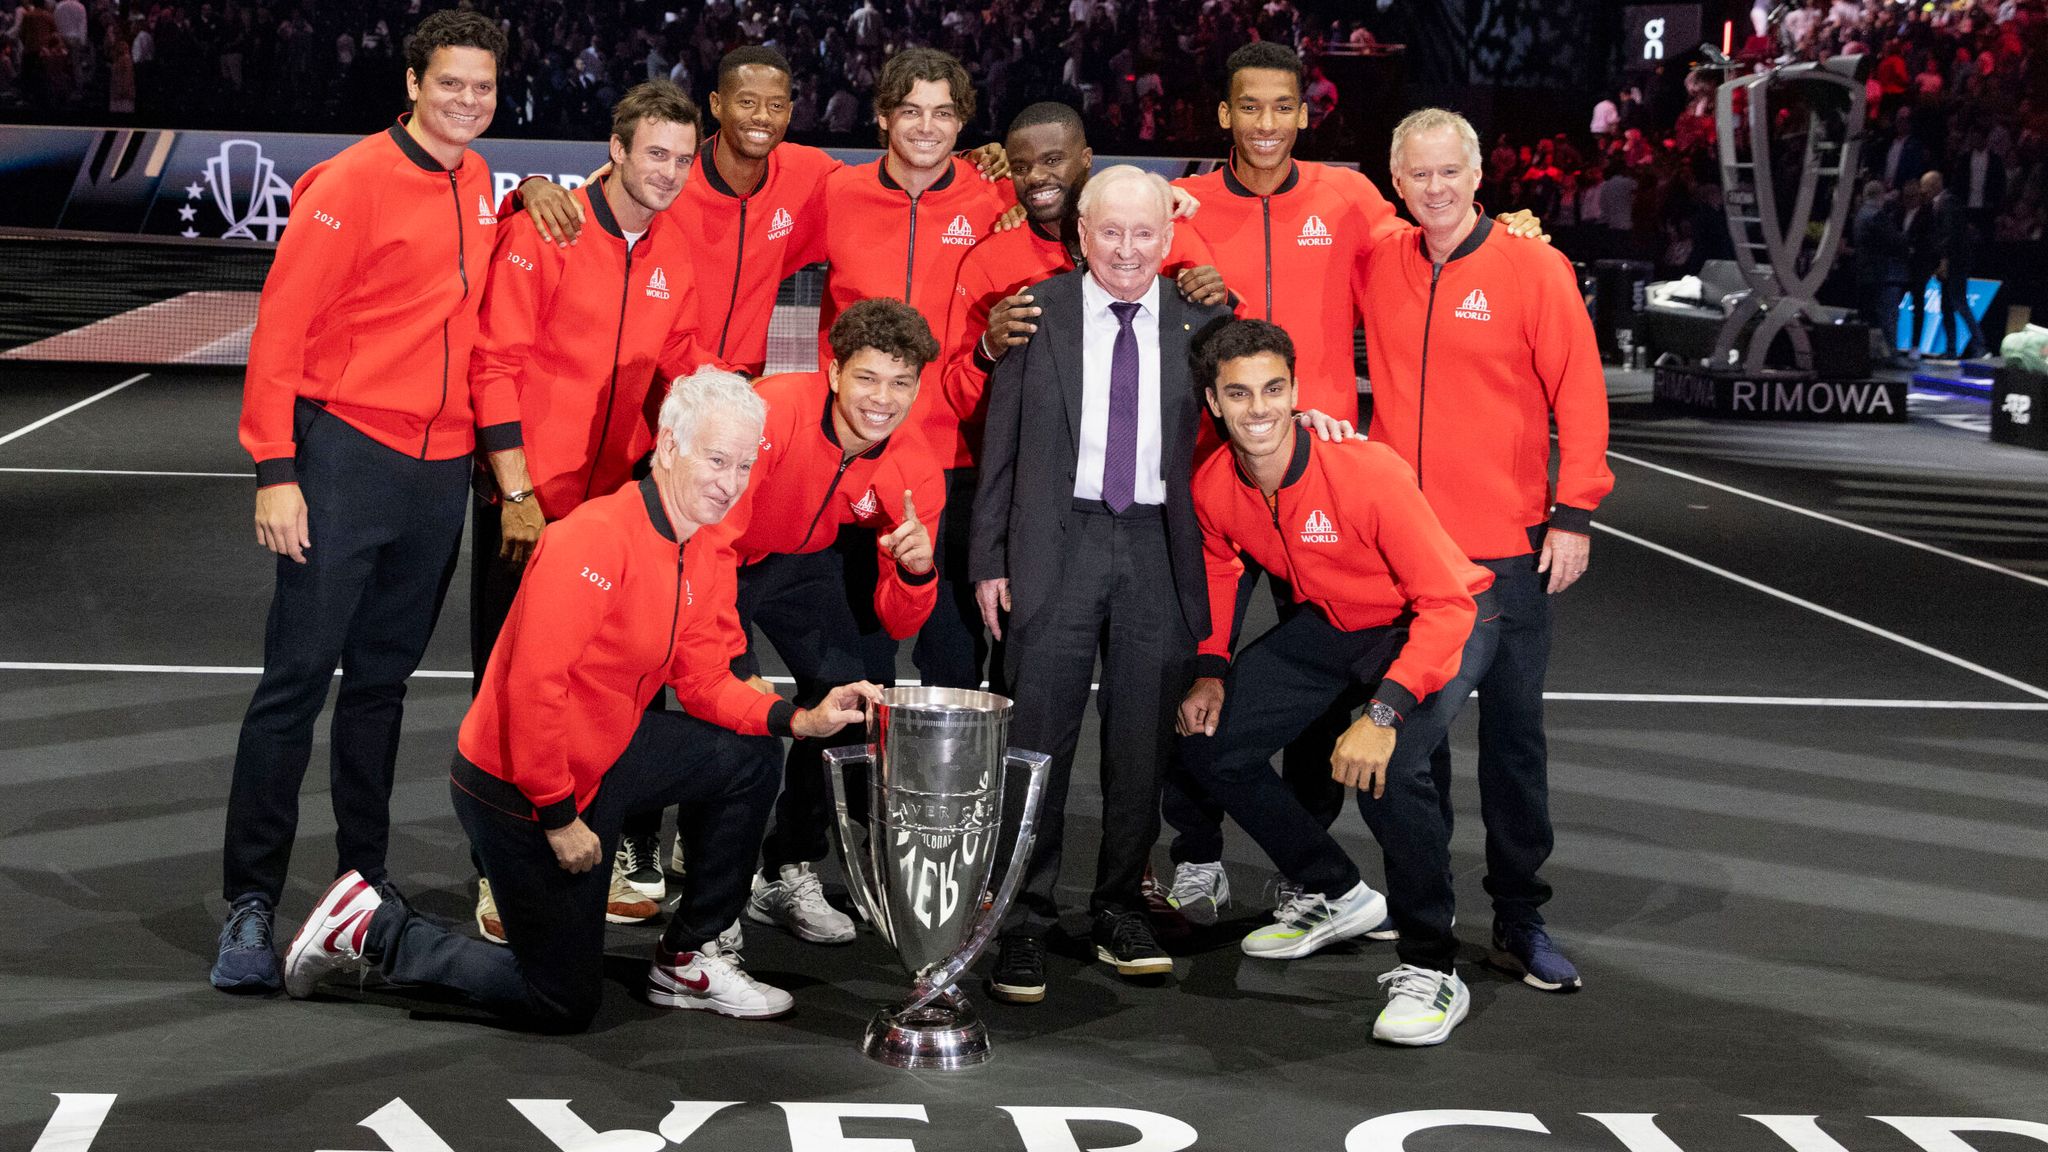 Laver Cup Ben Shelton and Frances Tiafoe help Team World to title in